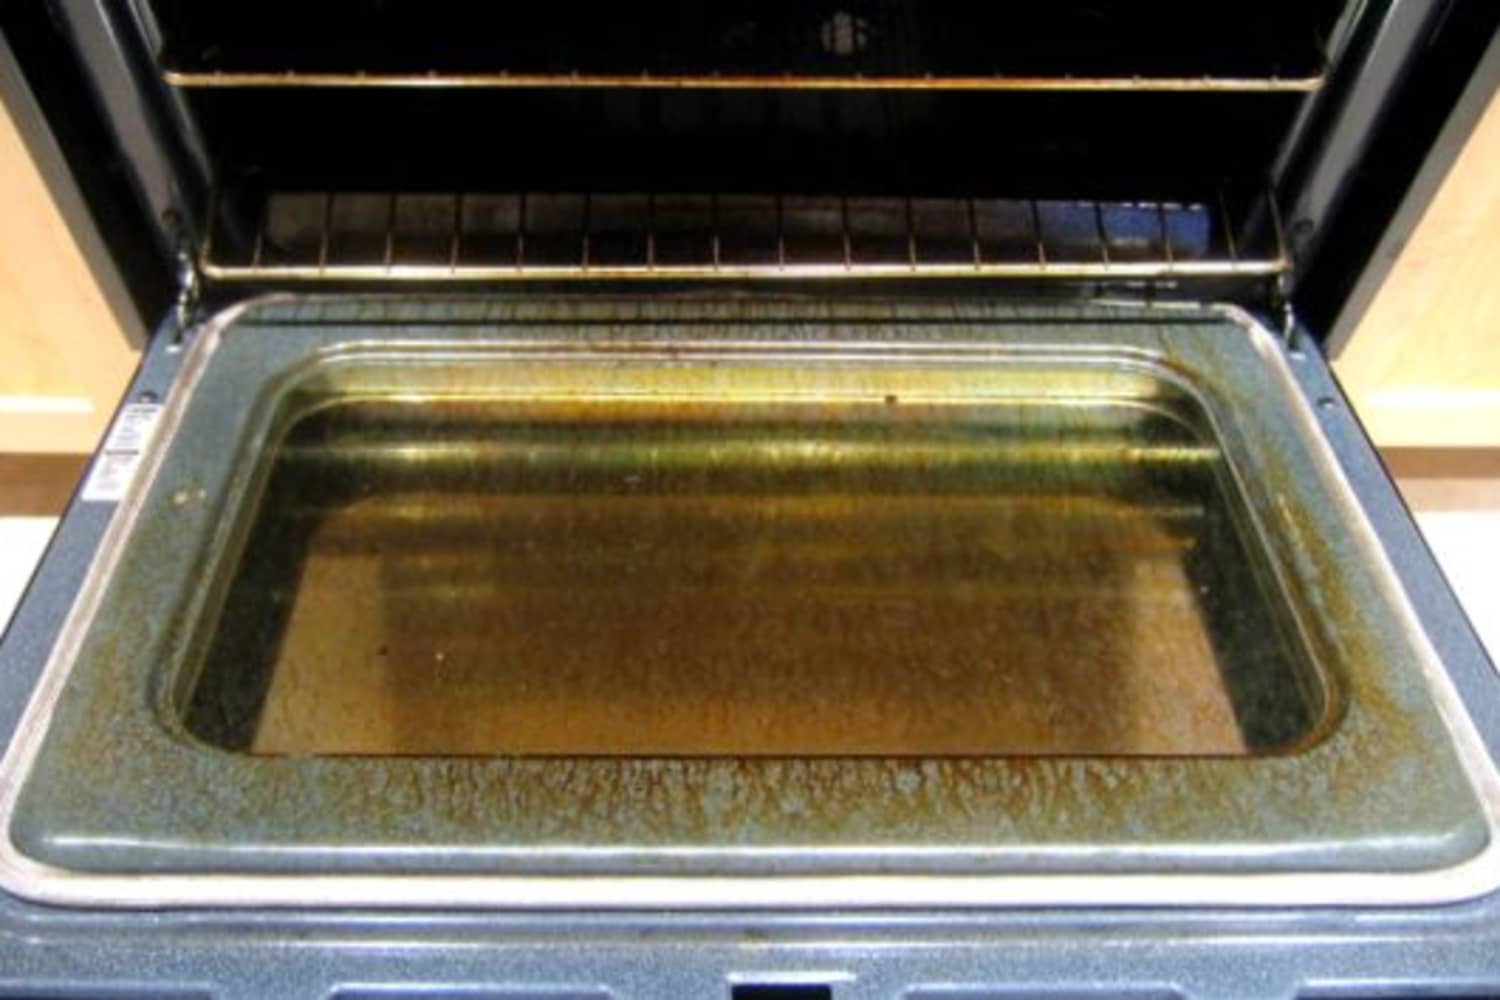 Why You Should (Almost) Never Use Your Oven's Self-Cleaning Function